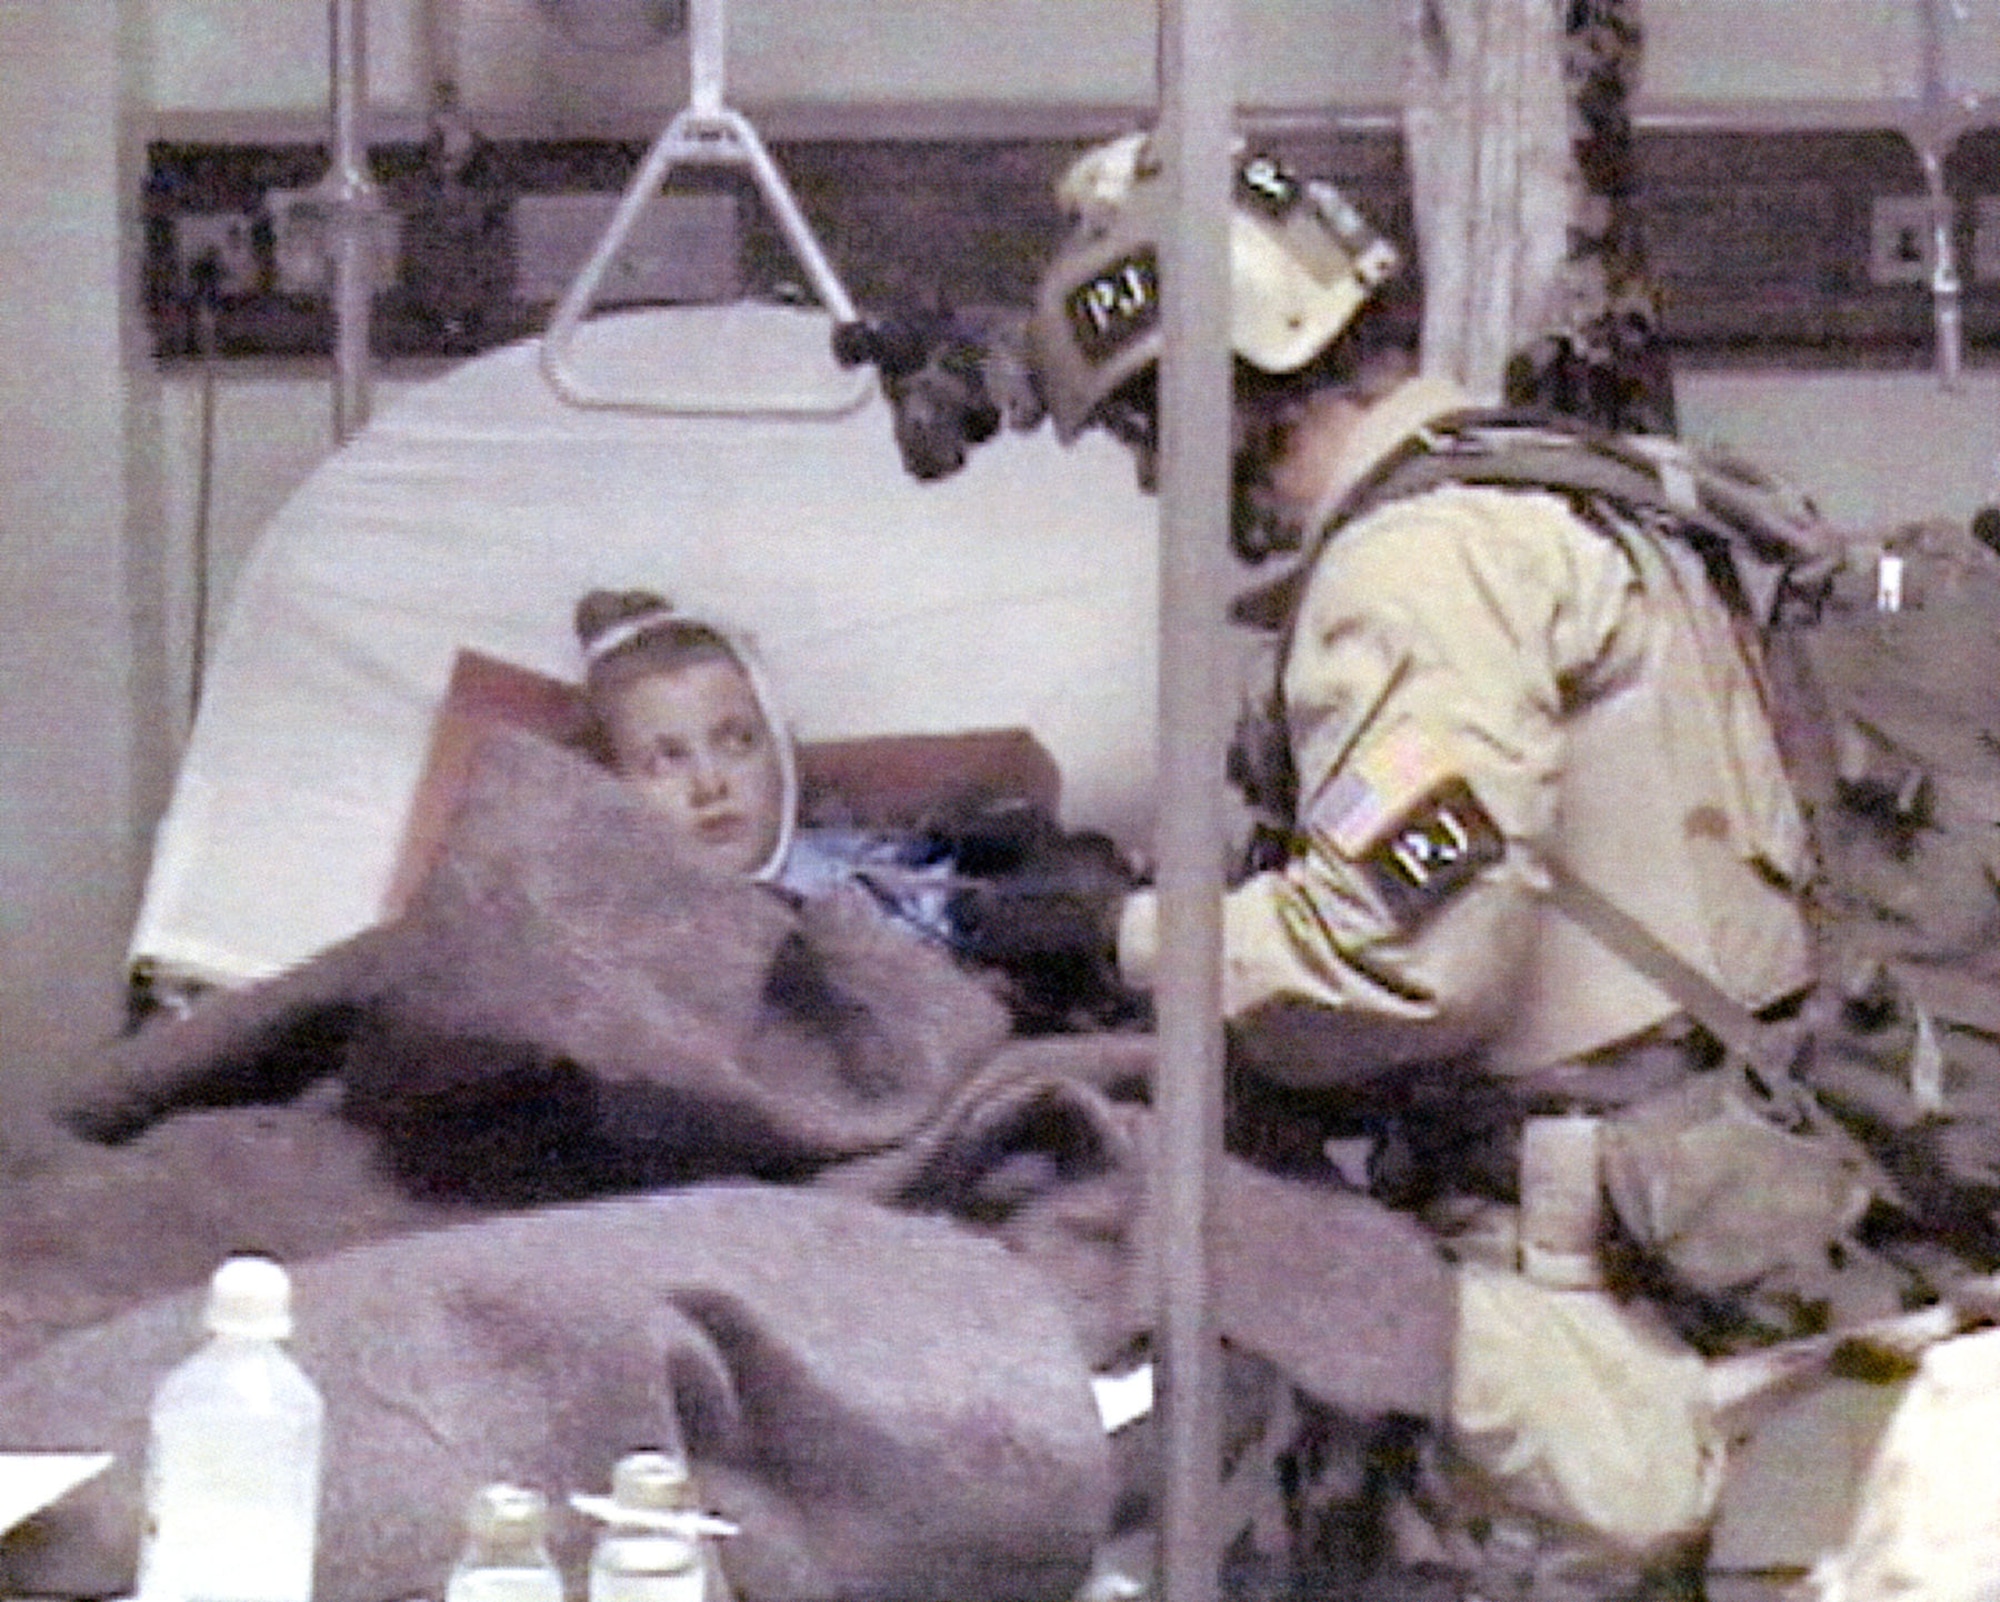 Air Force personnel were in the ground team that rescued Private Jessica Lynch. The first person in the team to reach her was a PJ. (U.S. Air Force photo)